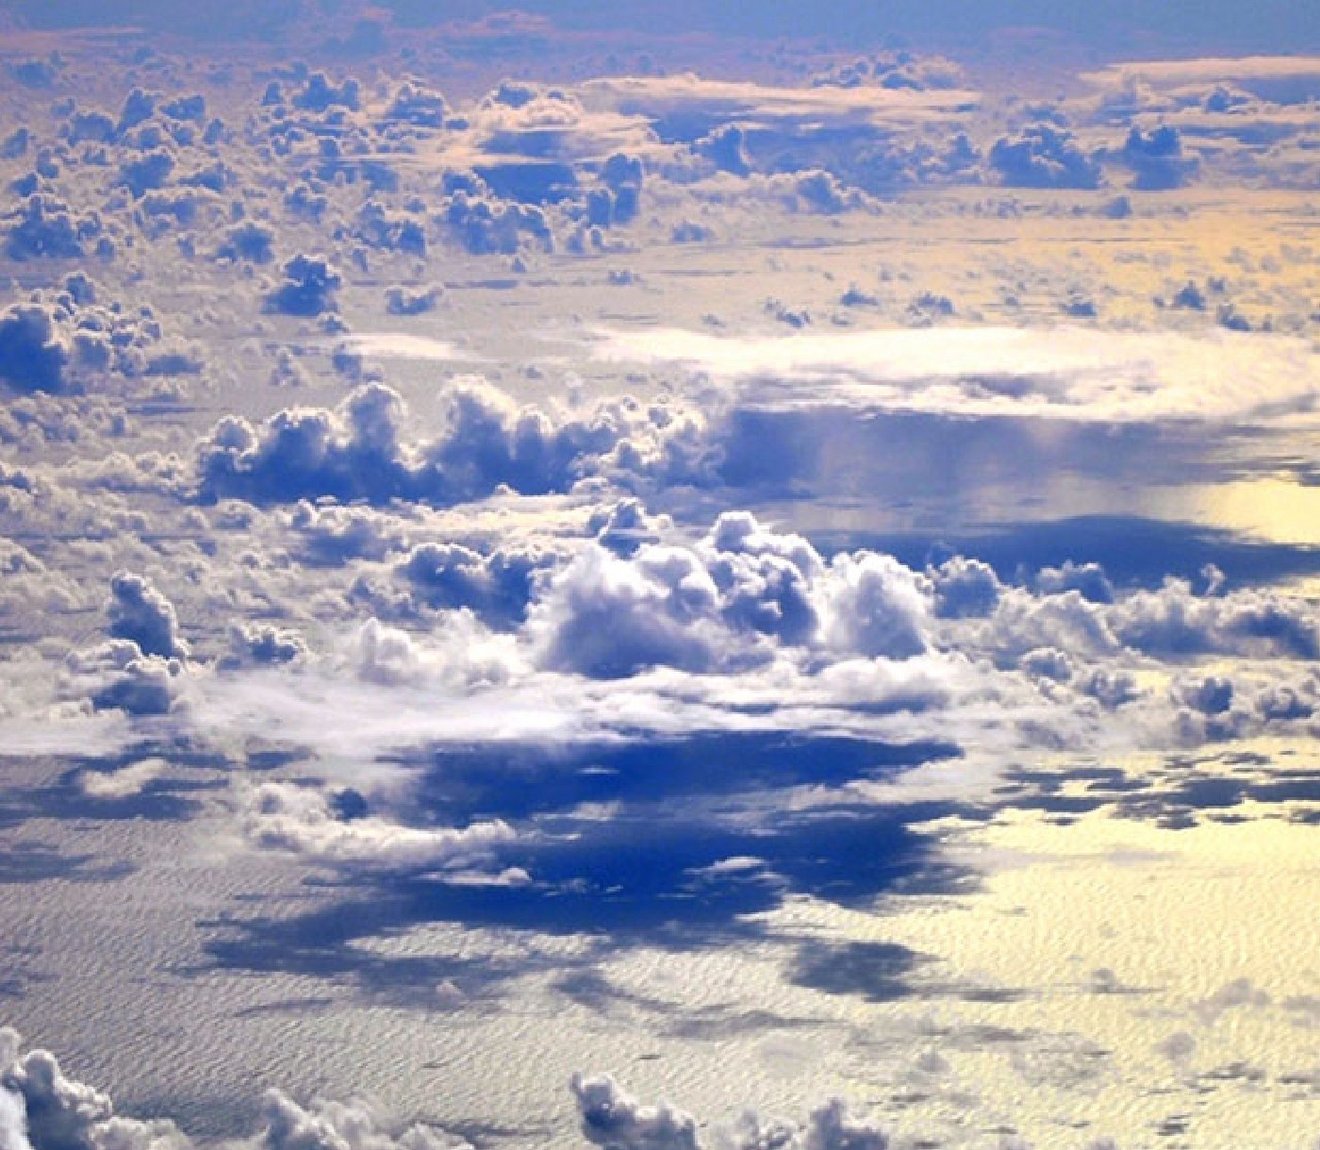 Photo of clouds and the ocean from above